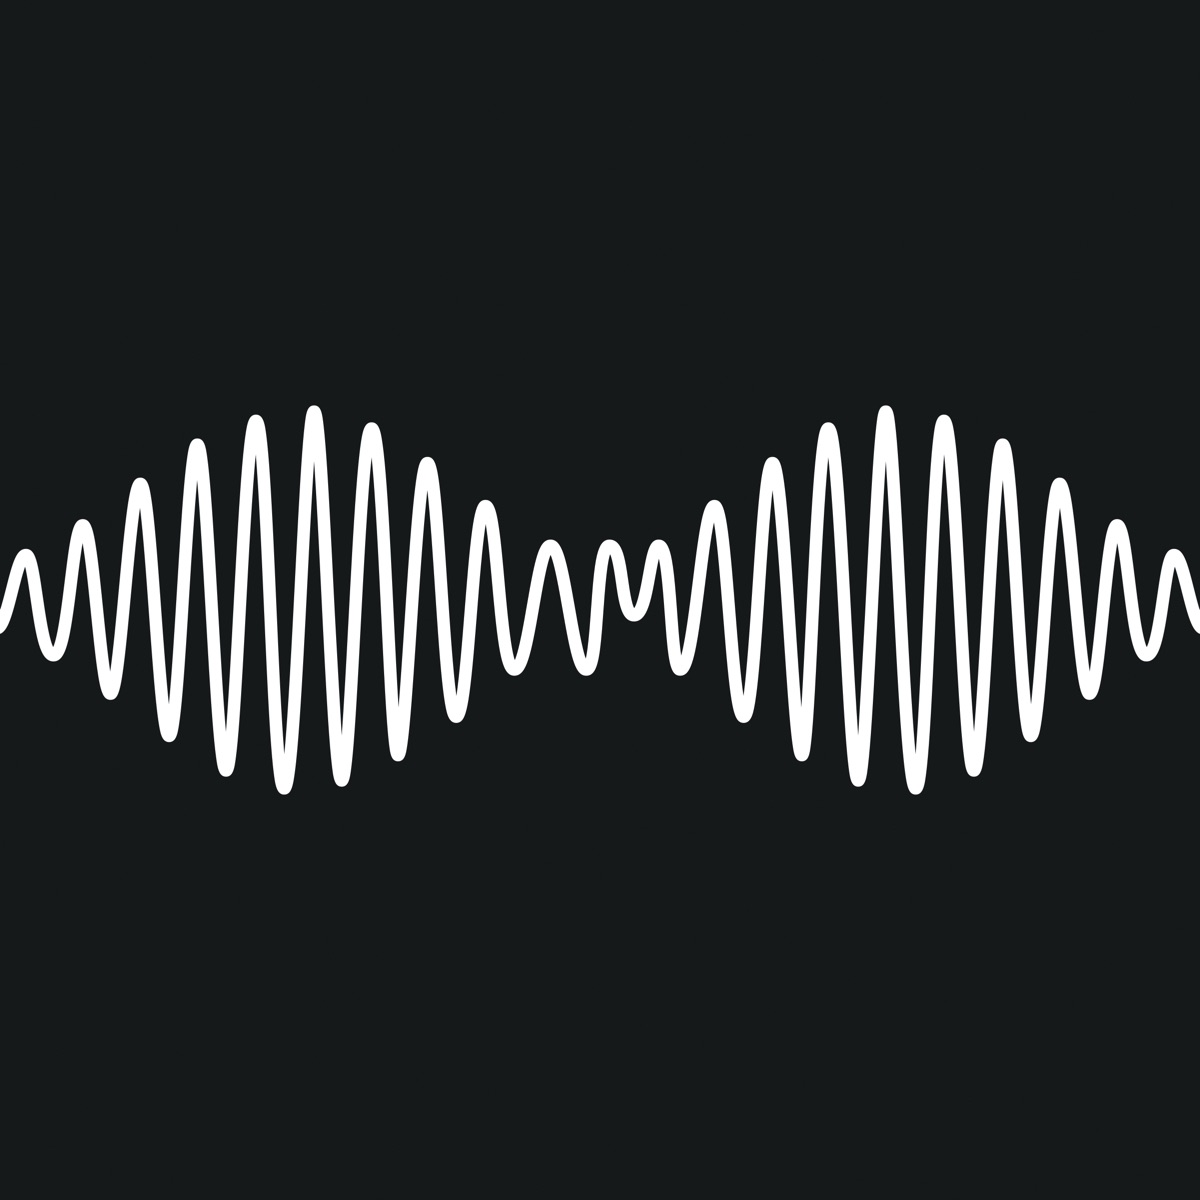 Arctic Monkeys — I Wanna Be Yours cover artwork